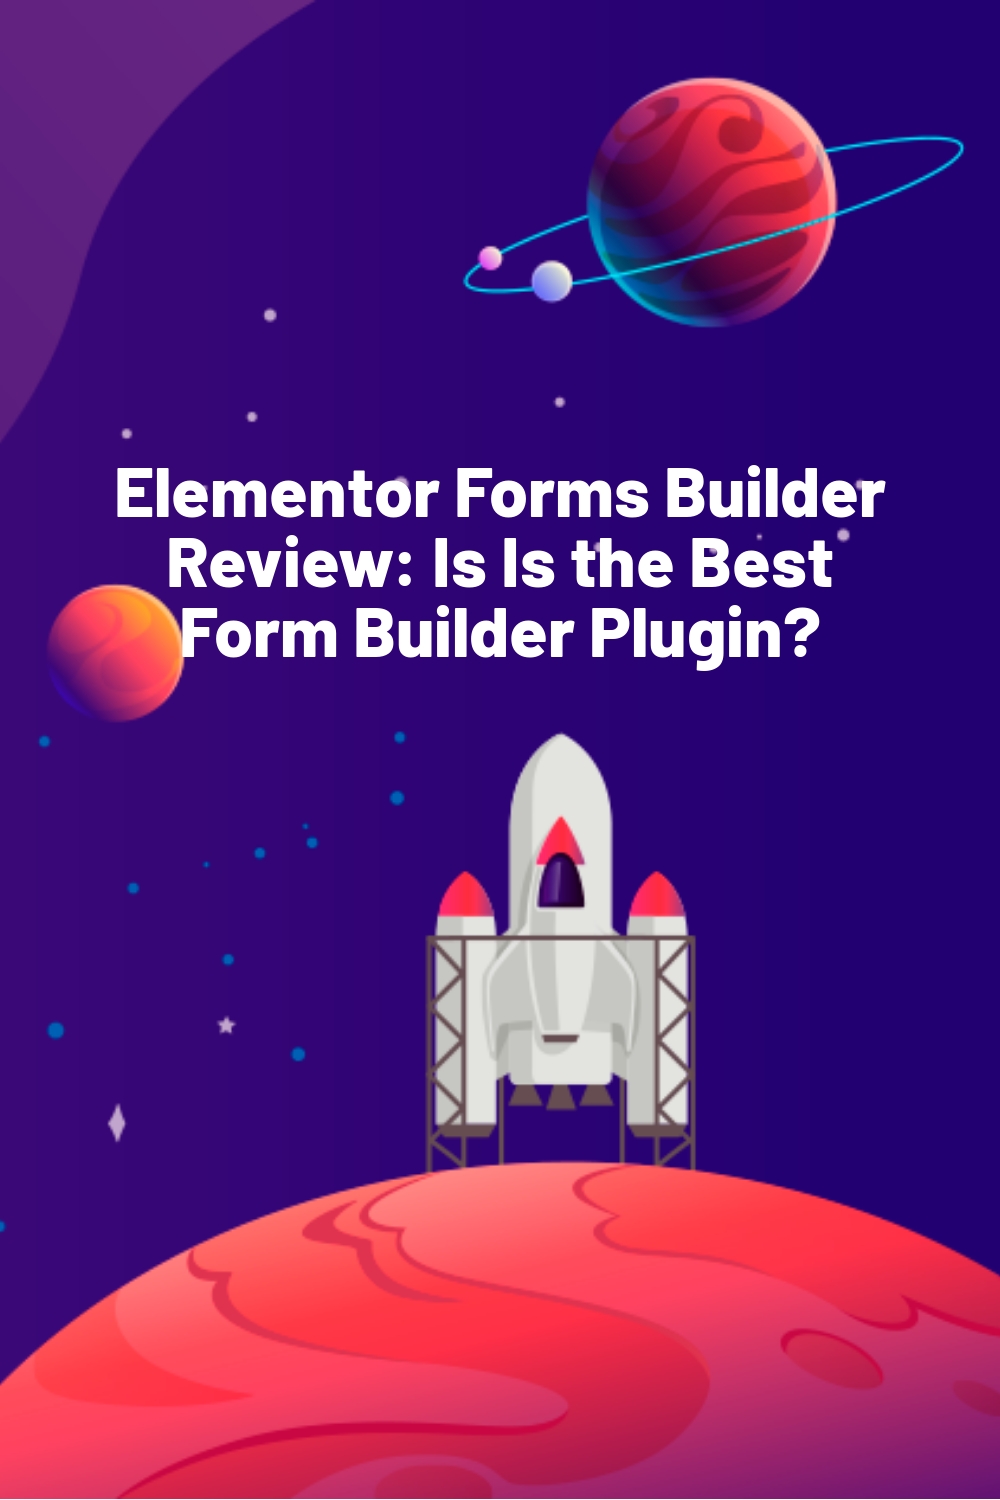 Elementor Forms Builder Review: Is Is the Best Form Builder Plugin?